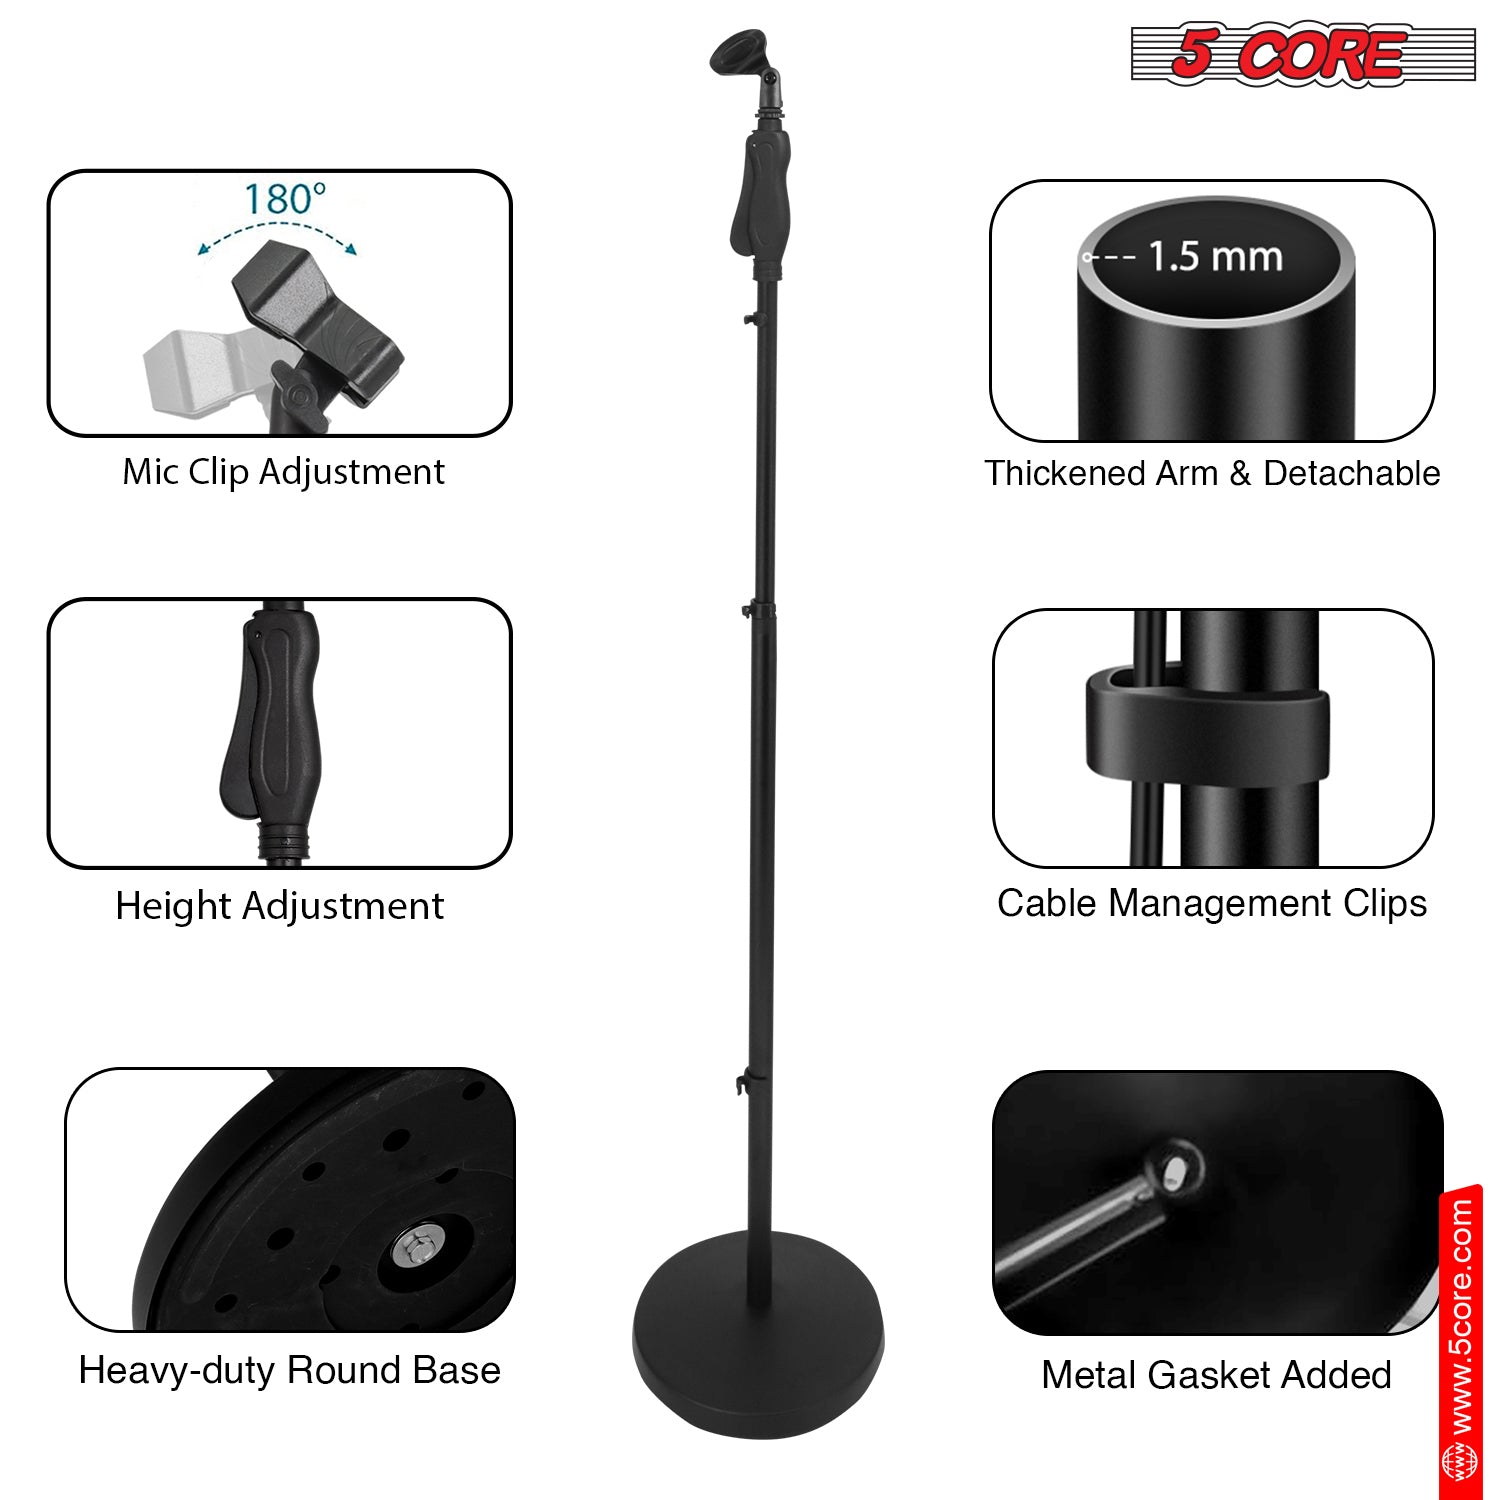 5Core Universal Microphone Stand Height Adjustable 35 to 57" Round Base Floor Mic Holder Metal Build